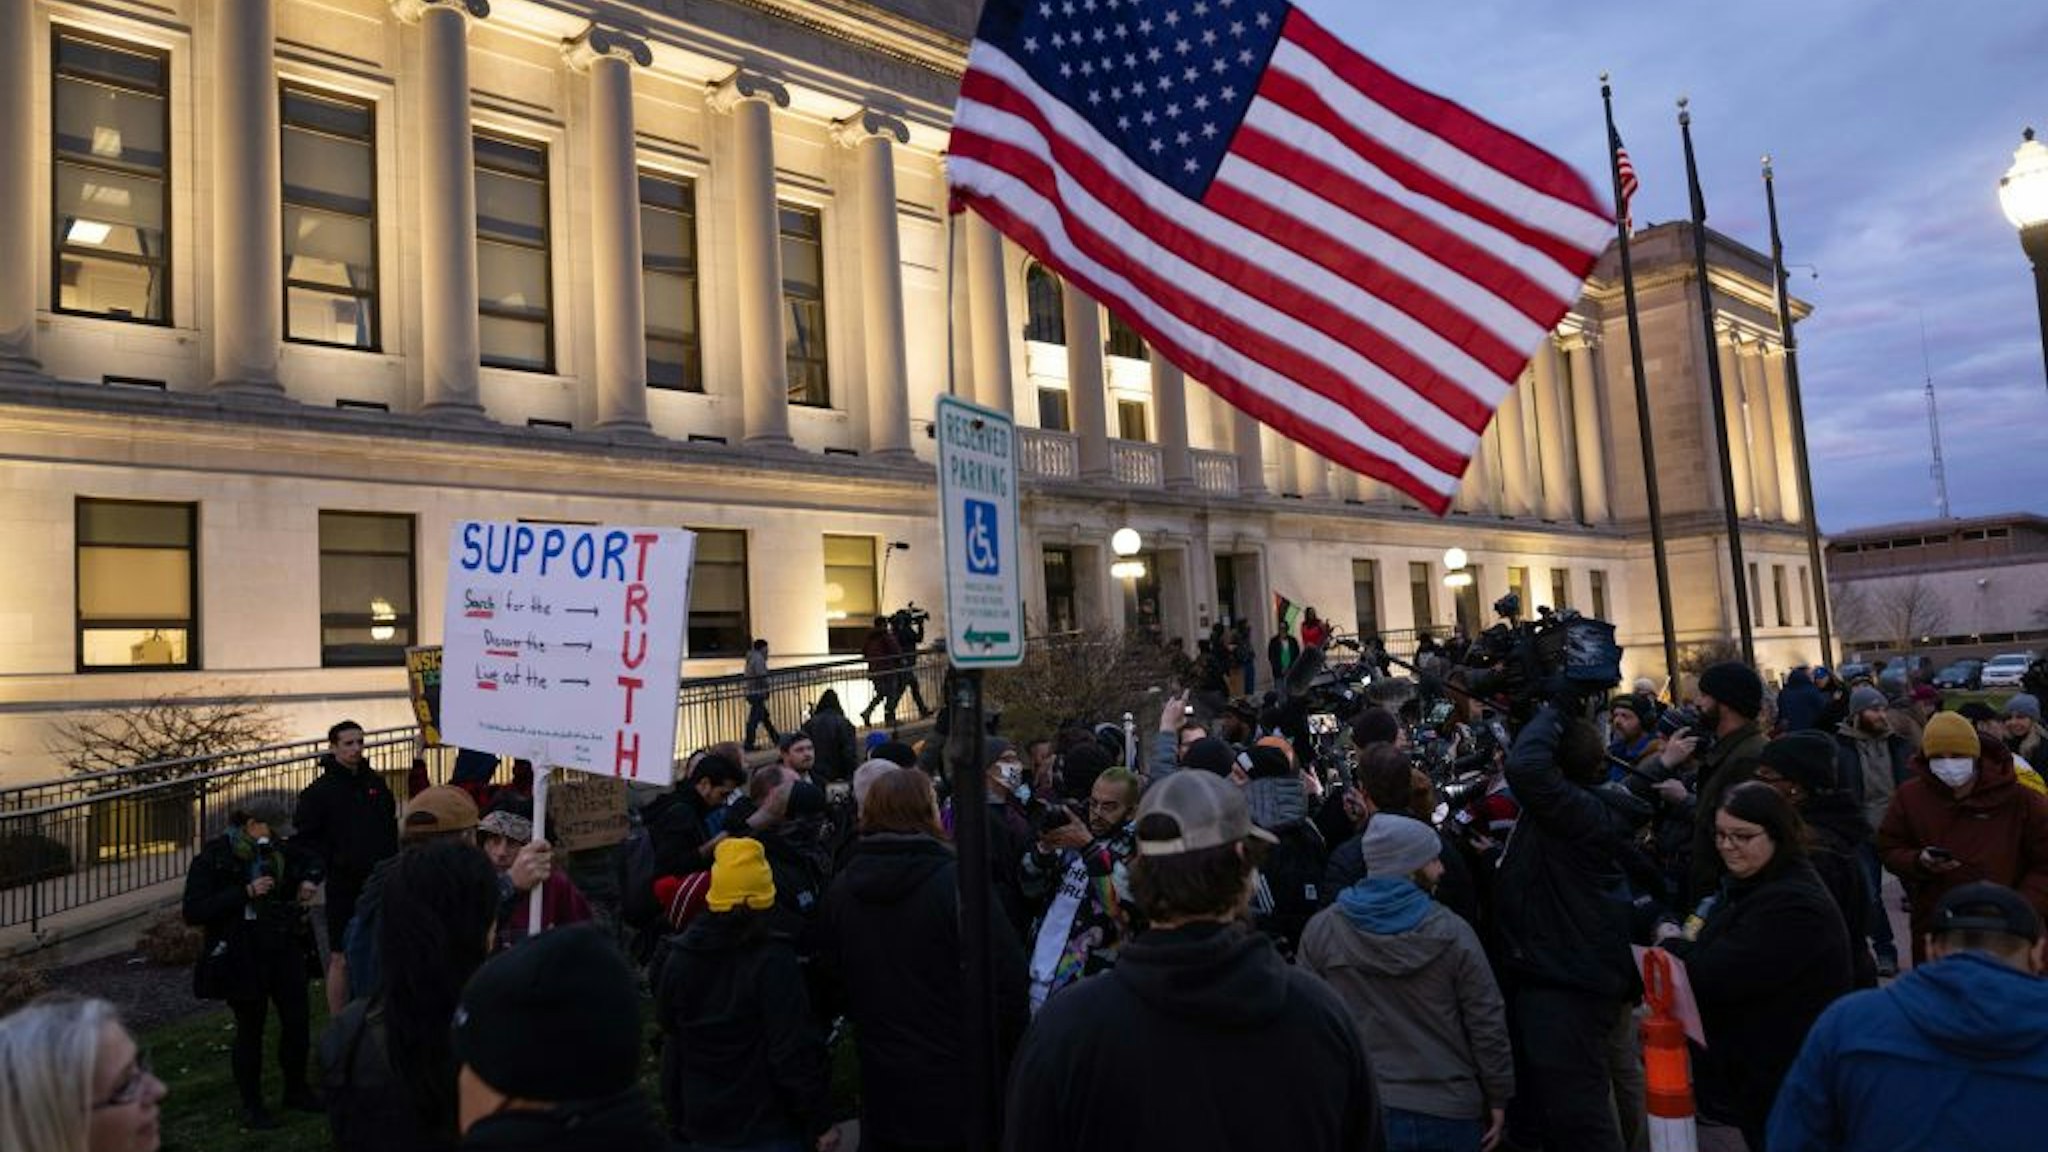 Demonstrators and members of the media outside of the Kenosha County Courthouse during the Kyle Rittenhouse trial in Kenosha, Wisconsin, U.S., on Wednesday, Nov. 17, 2021. Rittenhouse, 18, is accused of homicide in the deaths of Joseph Rosenbaum and Anthony Huber, as well as attempted homicide for shooting Gaige Grosskreutz.